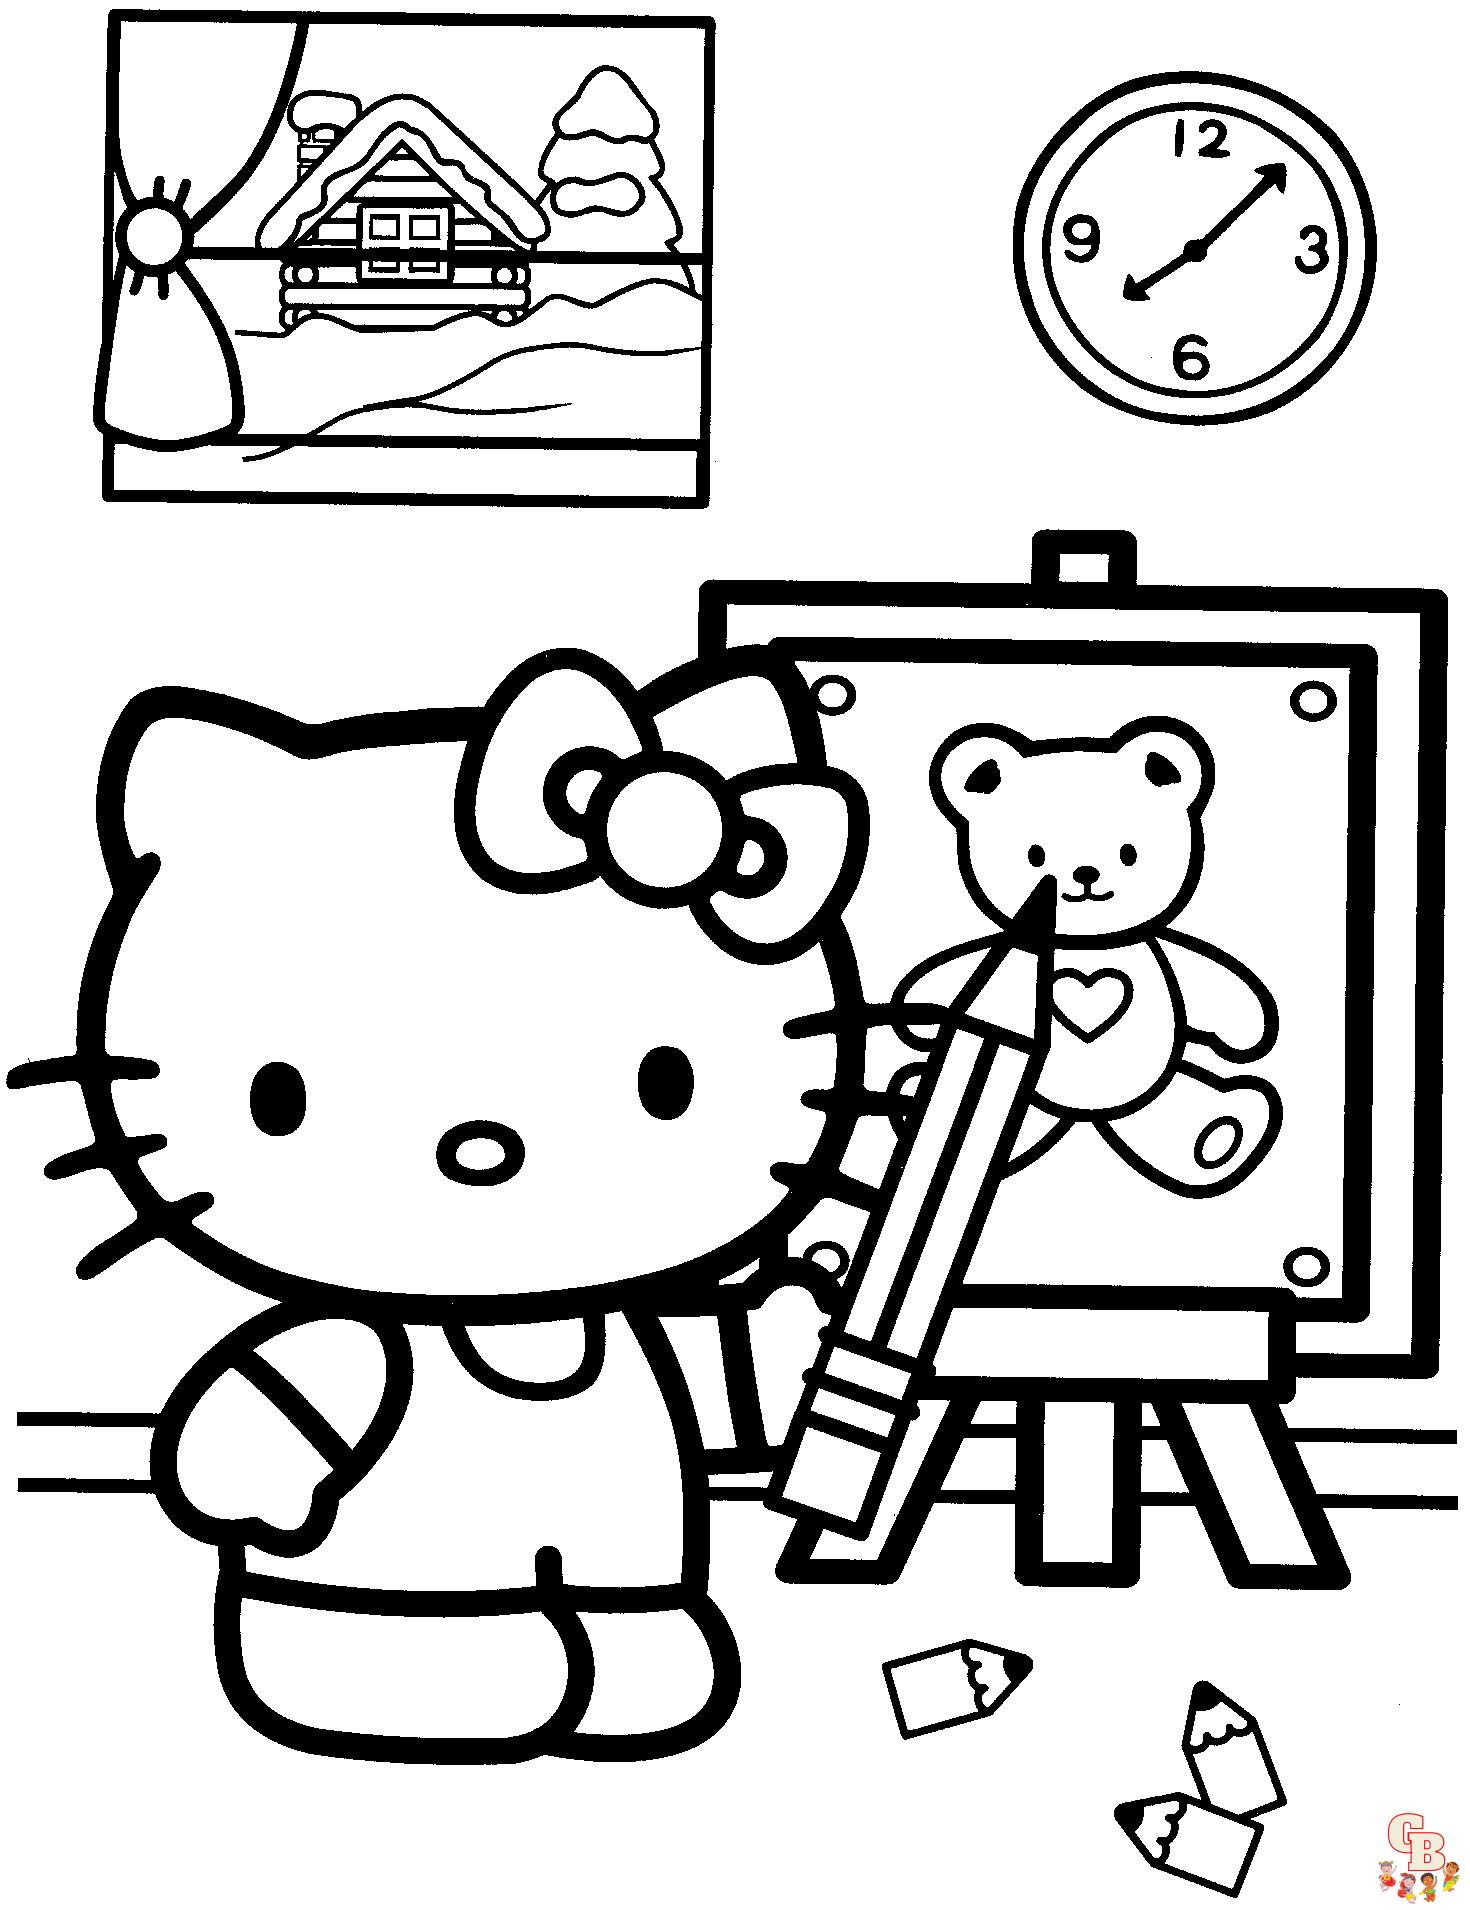 Sanrio Coloring Pages  Hello kitty colouring pages, Cartoon coloring pages,  Hello kitty coloring